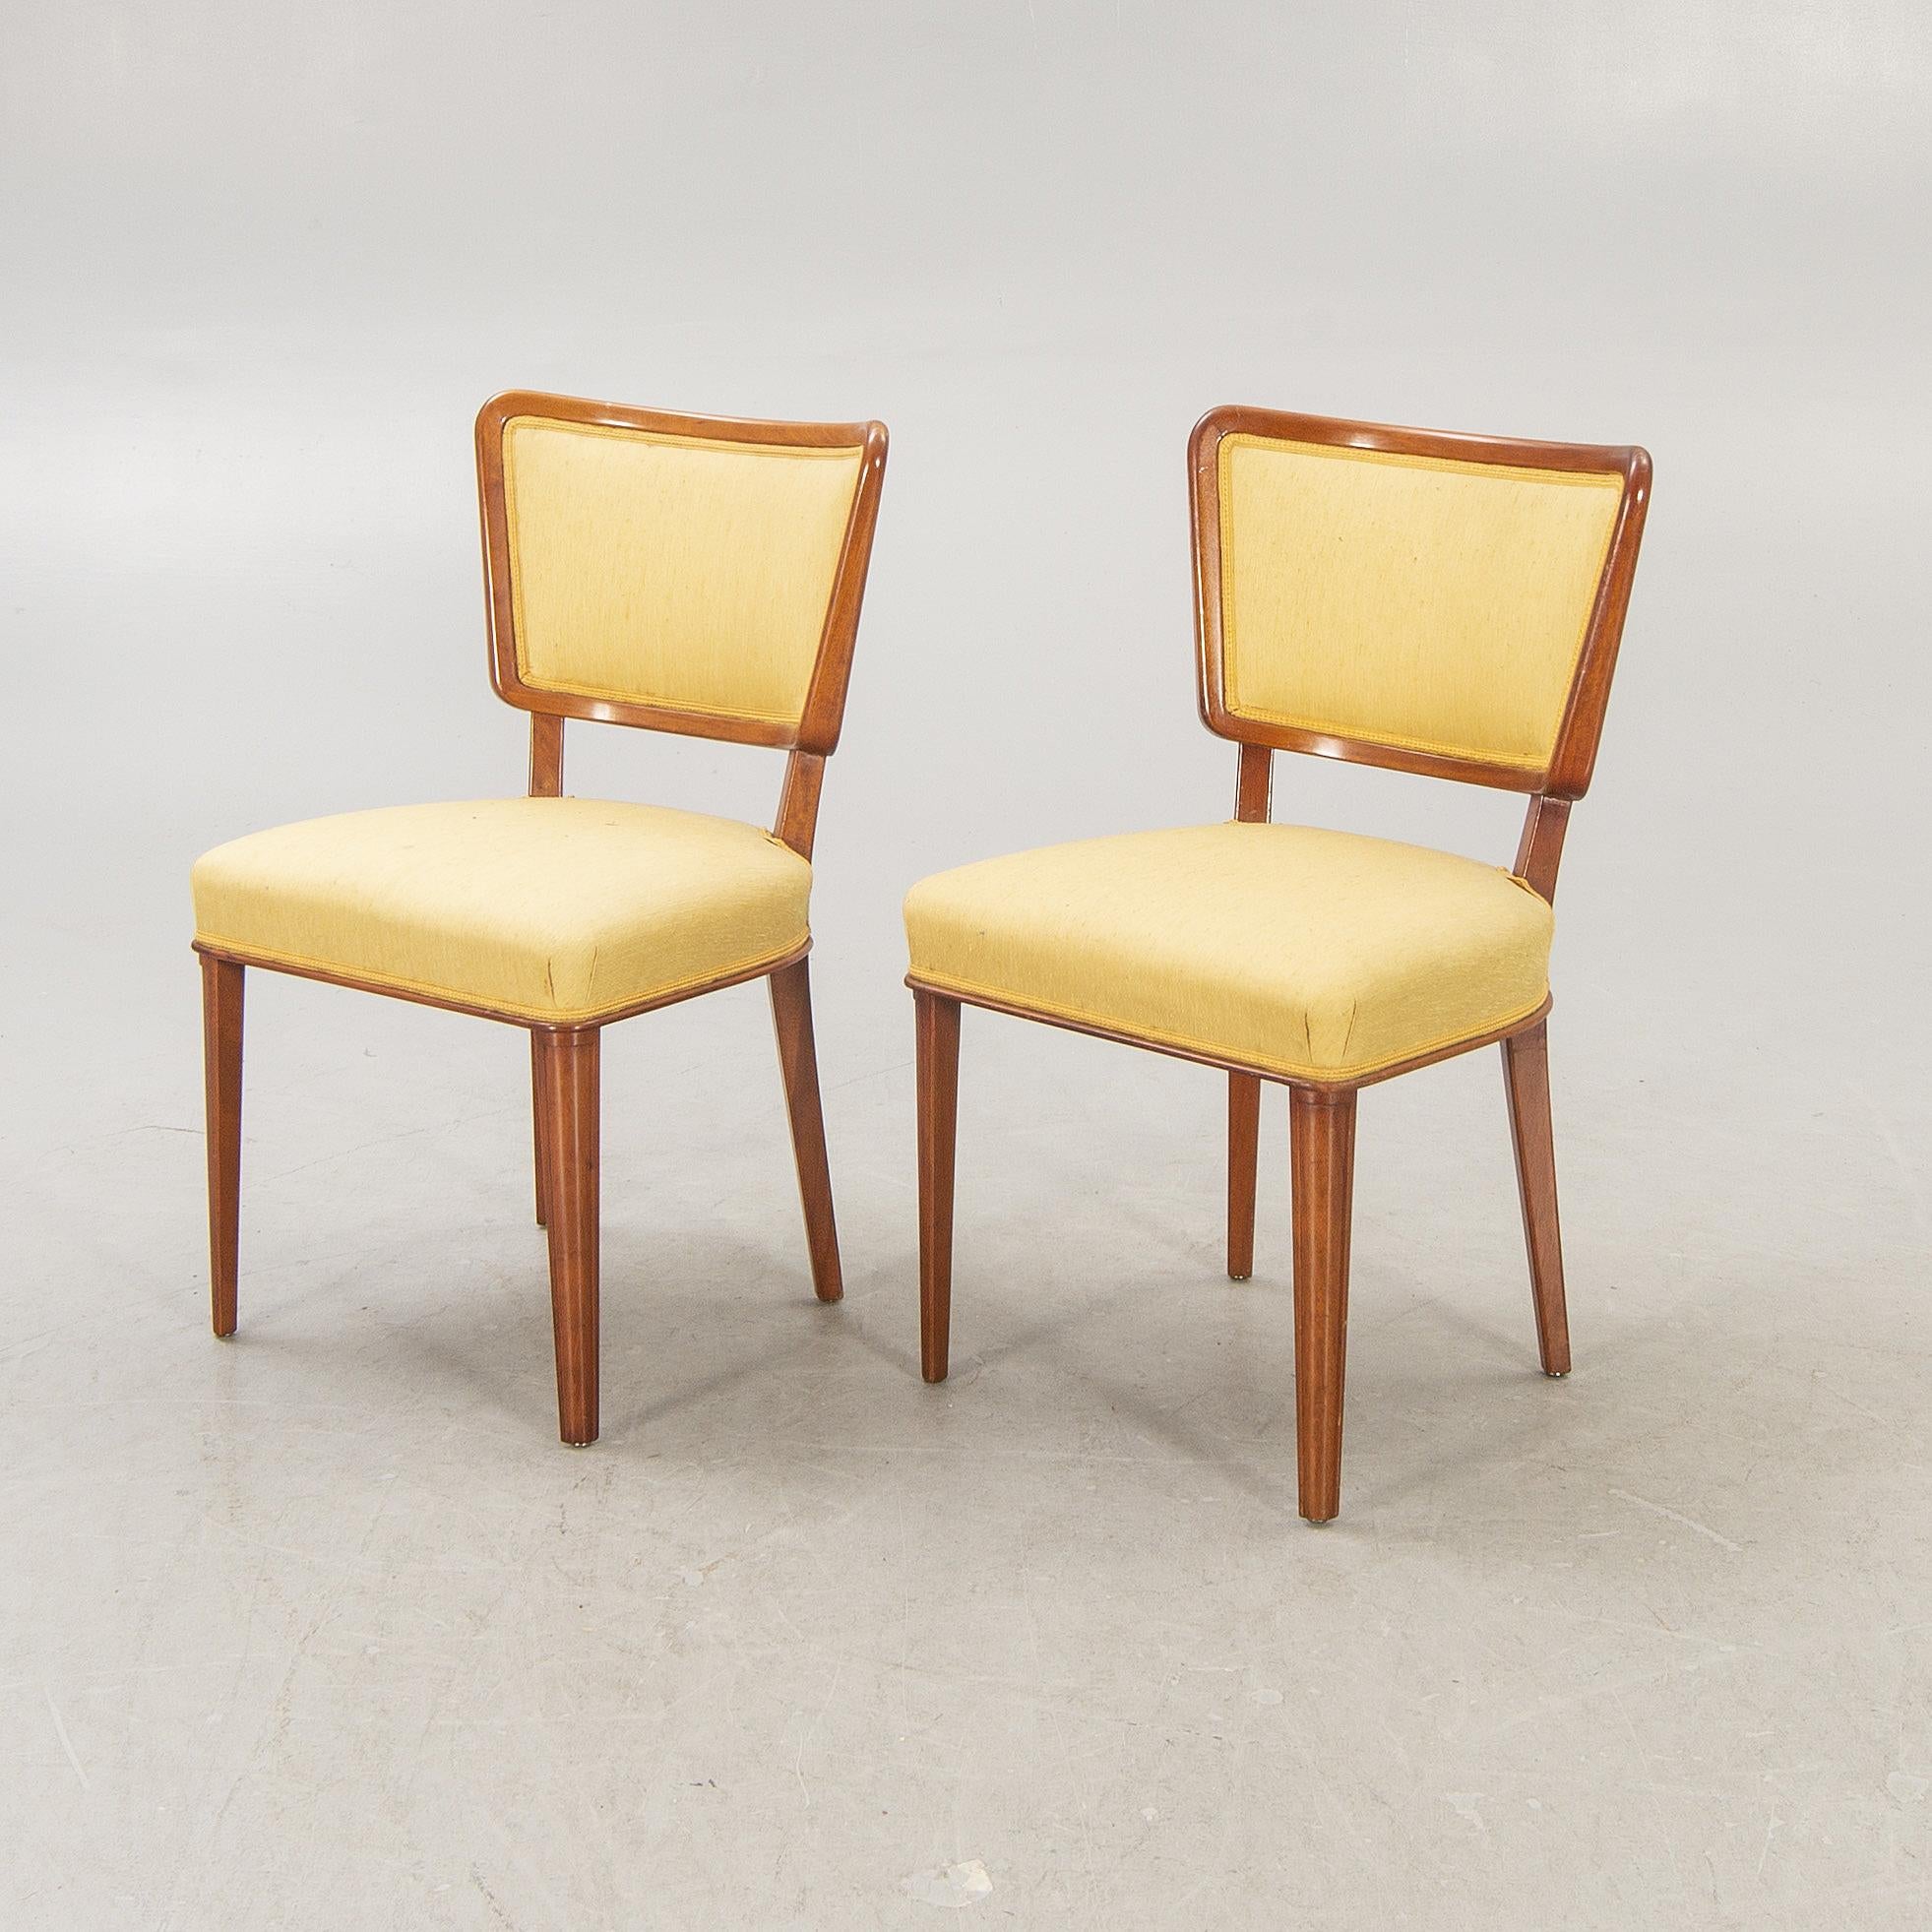 Mid-20th Century For Claire - Set of Four Swedish Modern Dining Chairs reupholstered in COM.